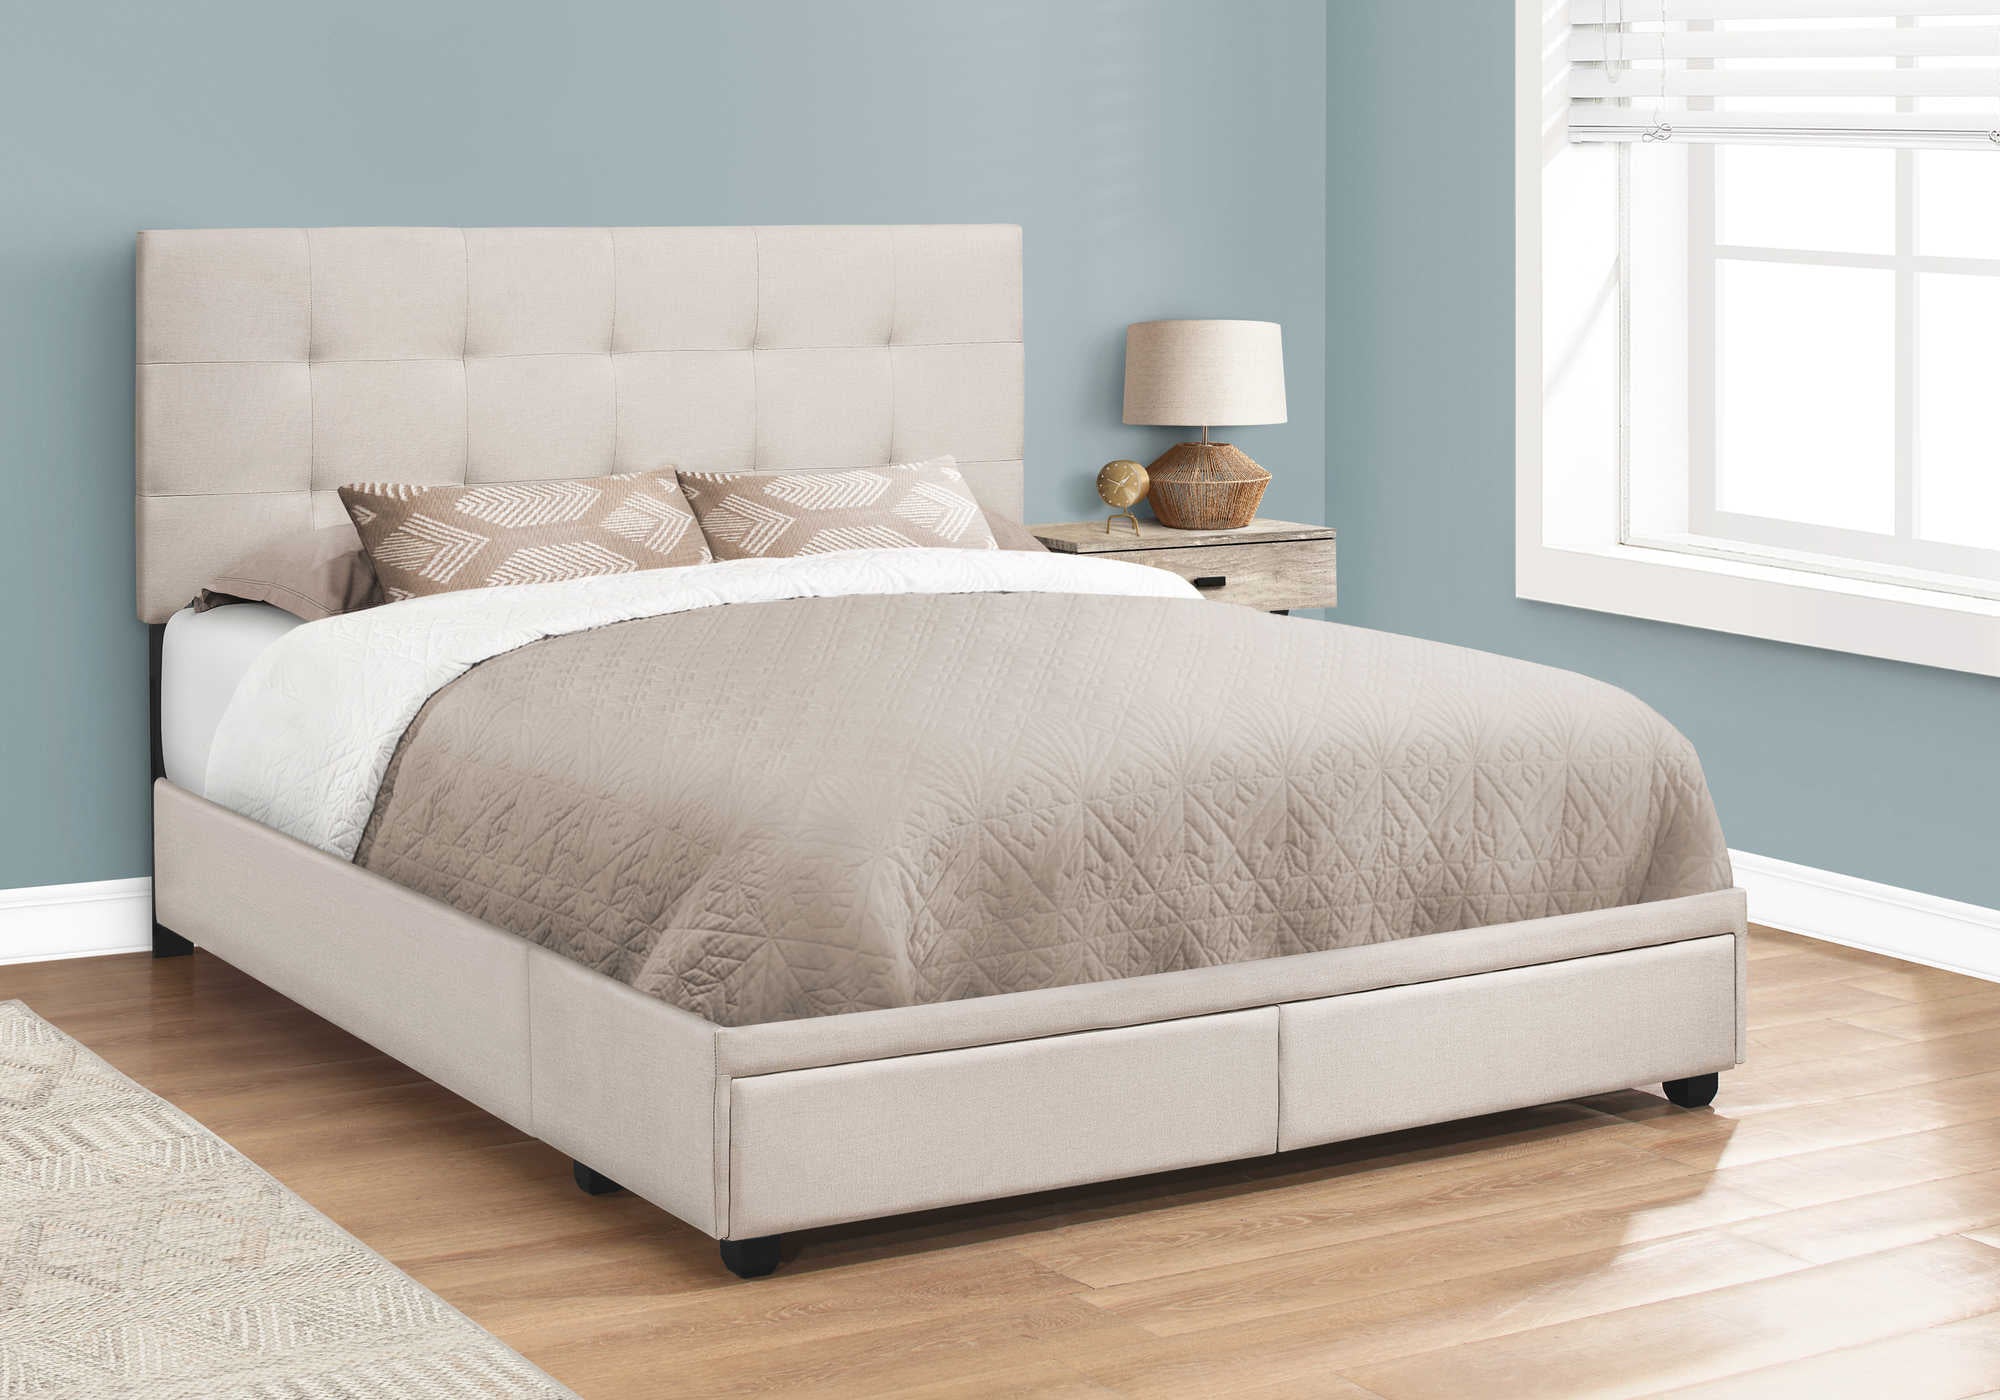 I 6021Q - BED - QUEEN SIZE / BEIGE LINEN WITH 2 STORAGE DRAWERS BY MONARCH SPECIALITIES INC